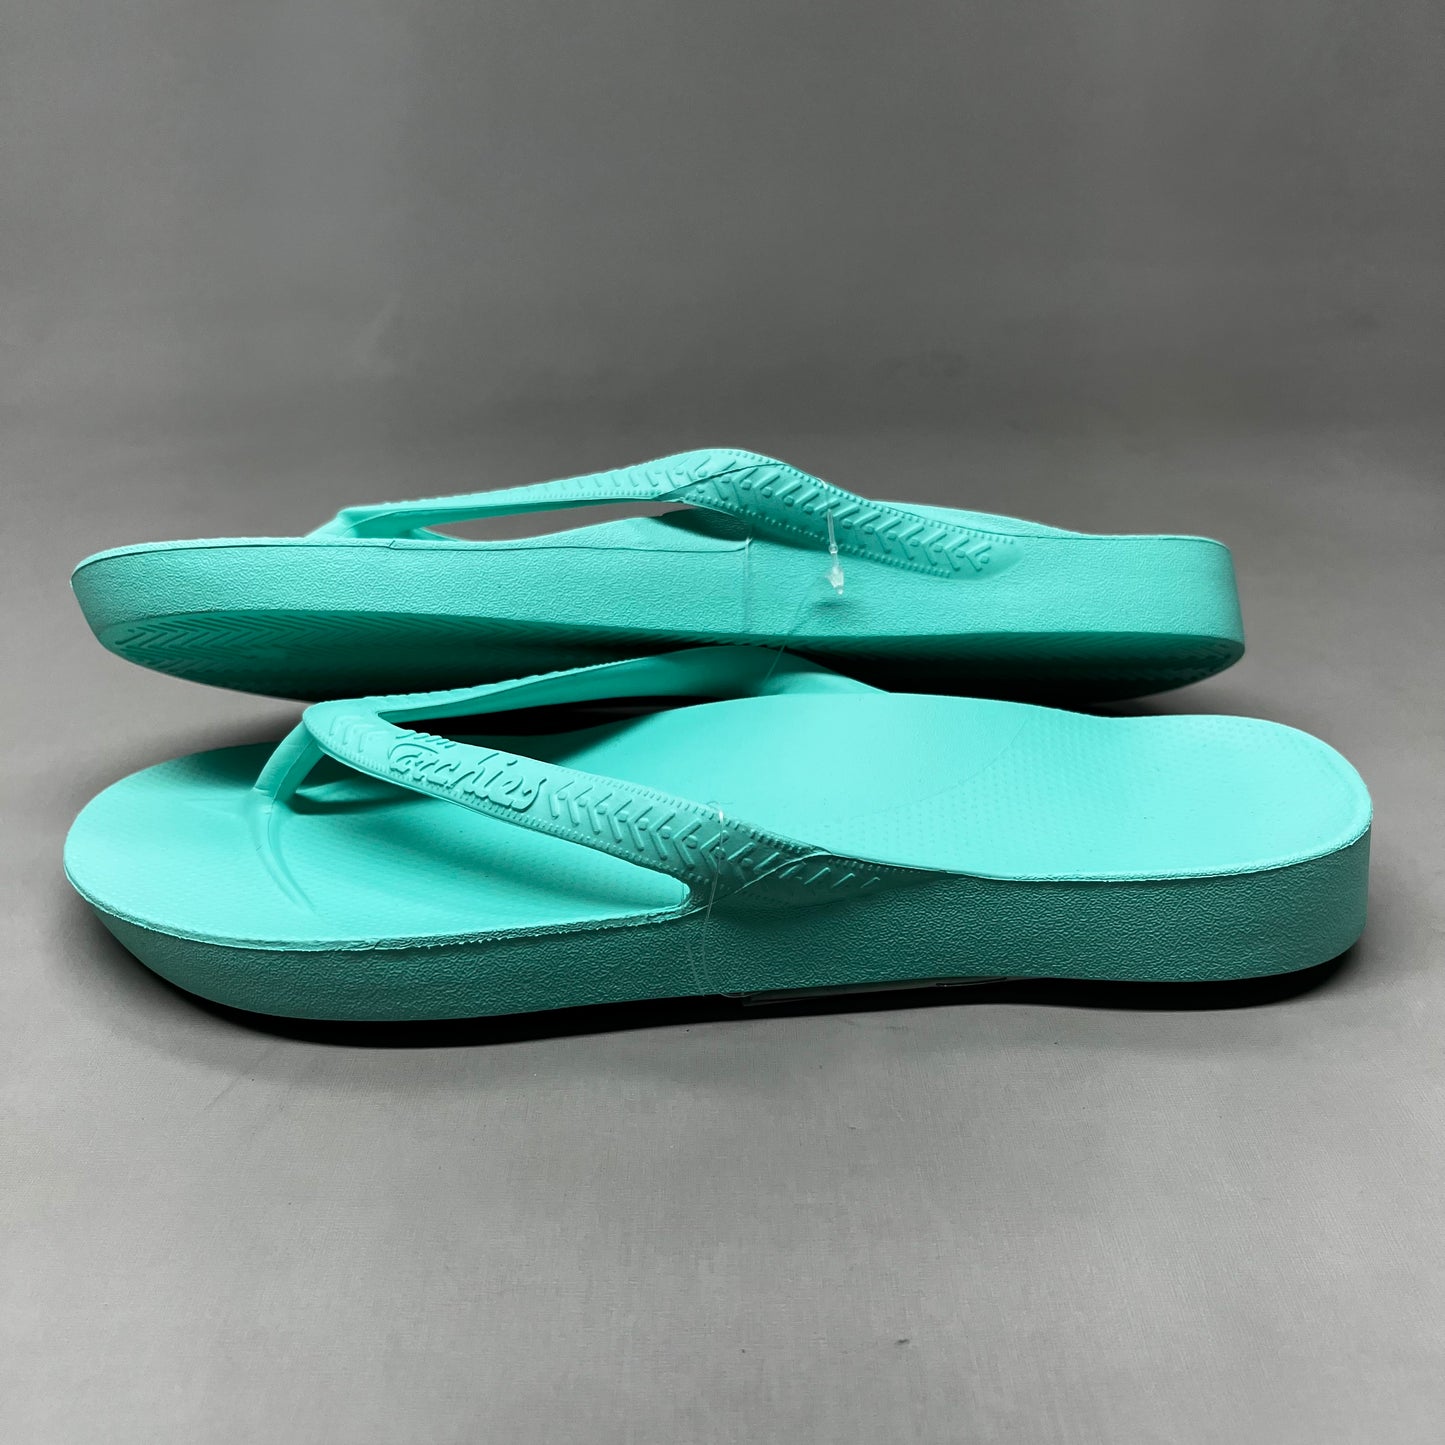 ARCHIES Arch Support Thongs HIGH SUPPORT Flip Flops Wmn's Sz 5 Men's Sz 4 Teal (New)